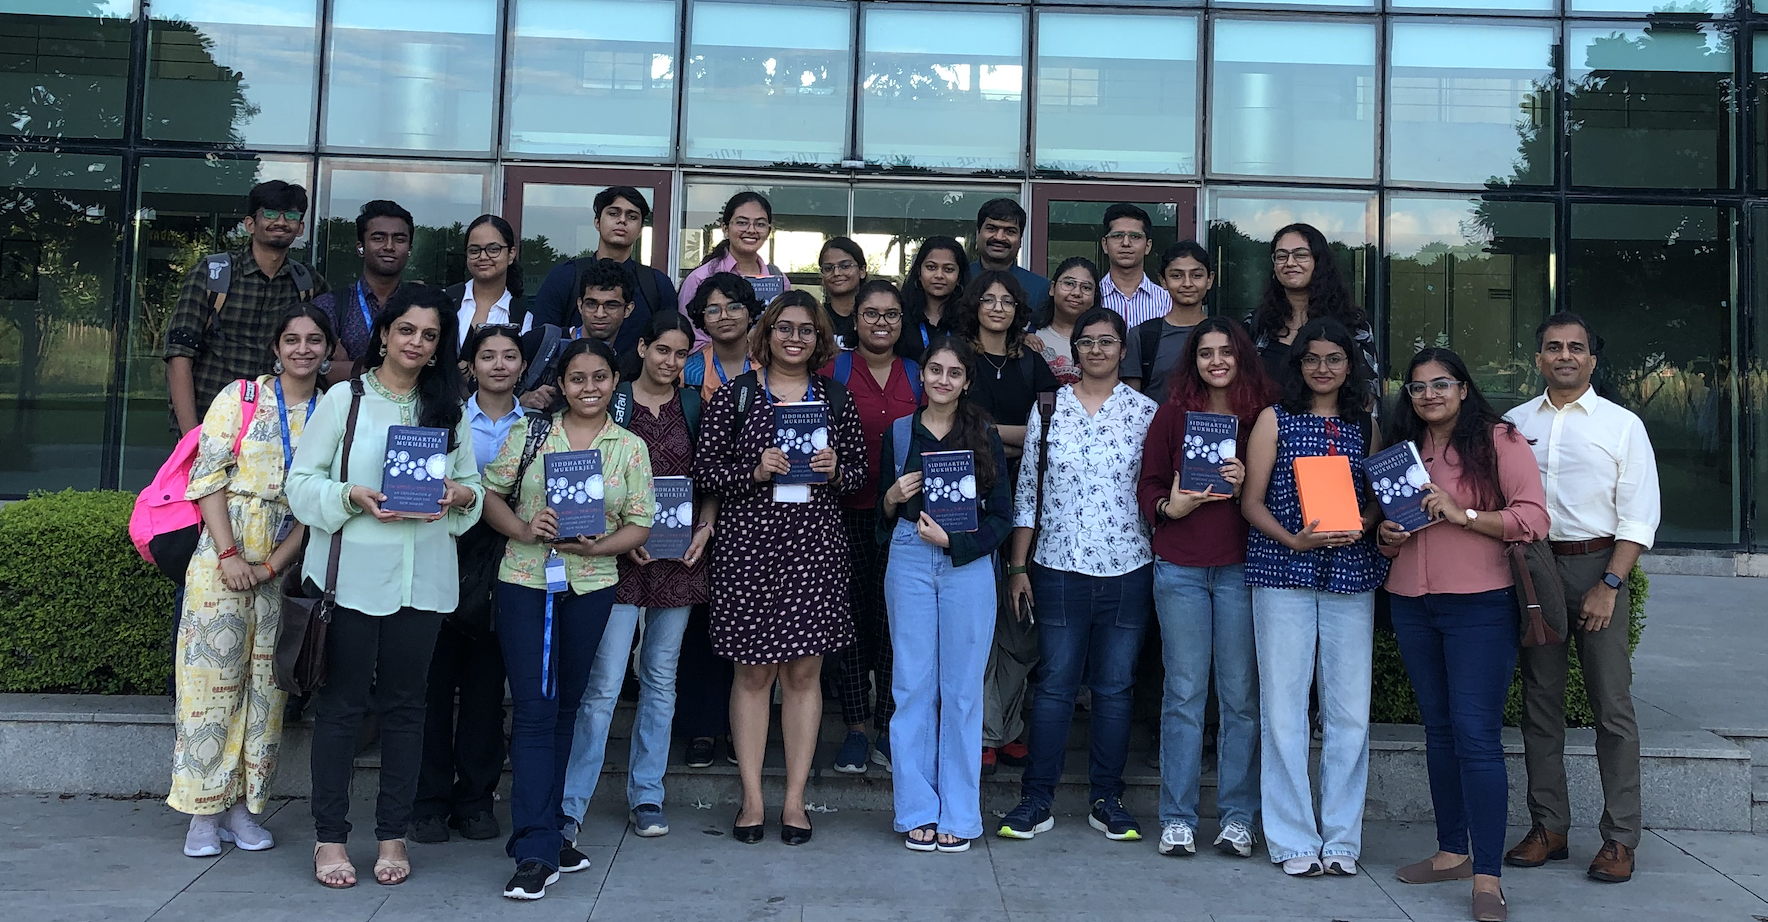 Participants posing with Siddharth Mukherjee's book, 'The song of the cell'.